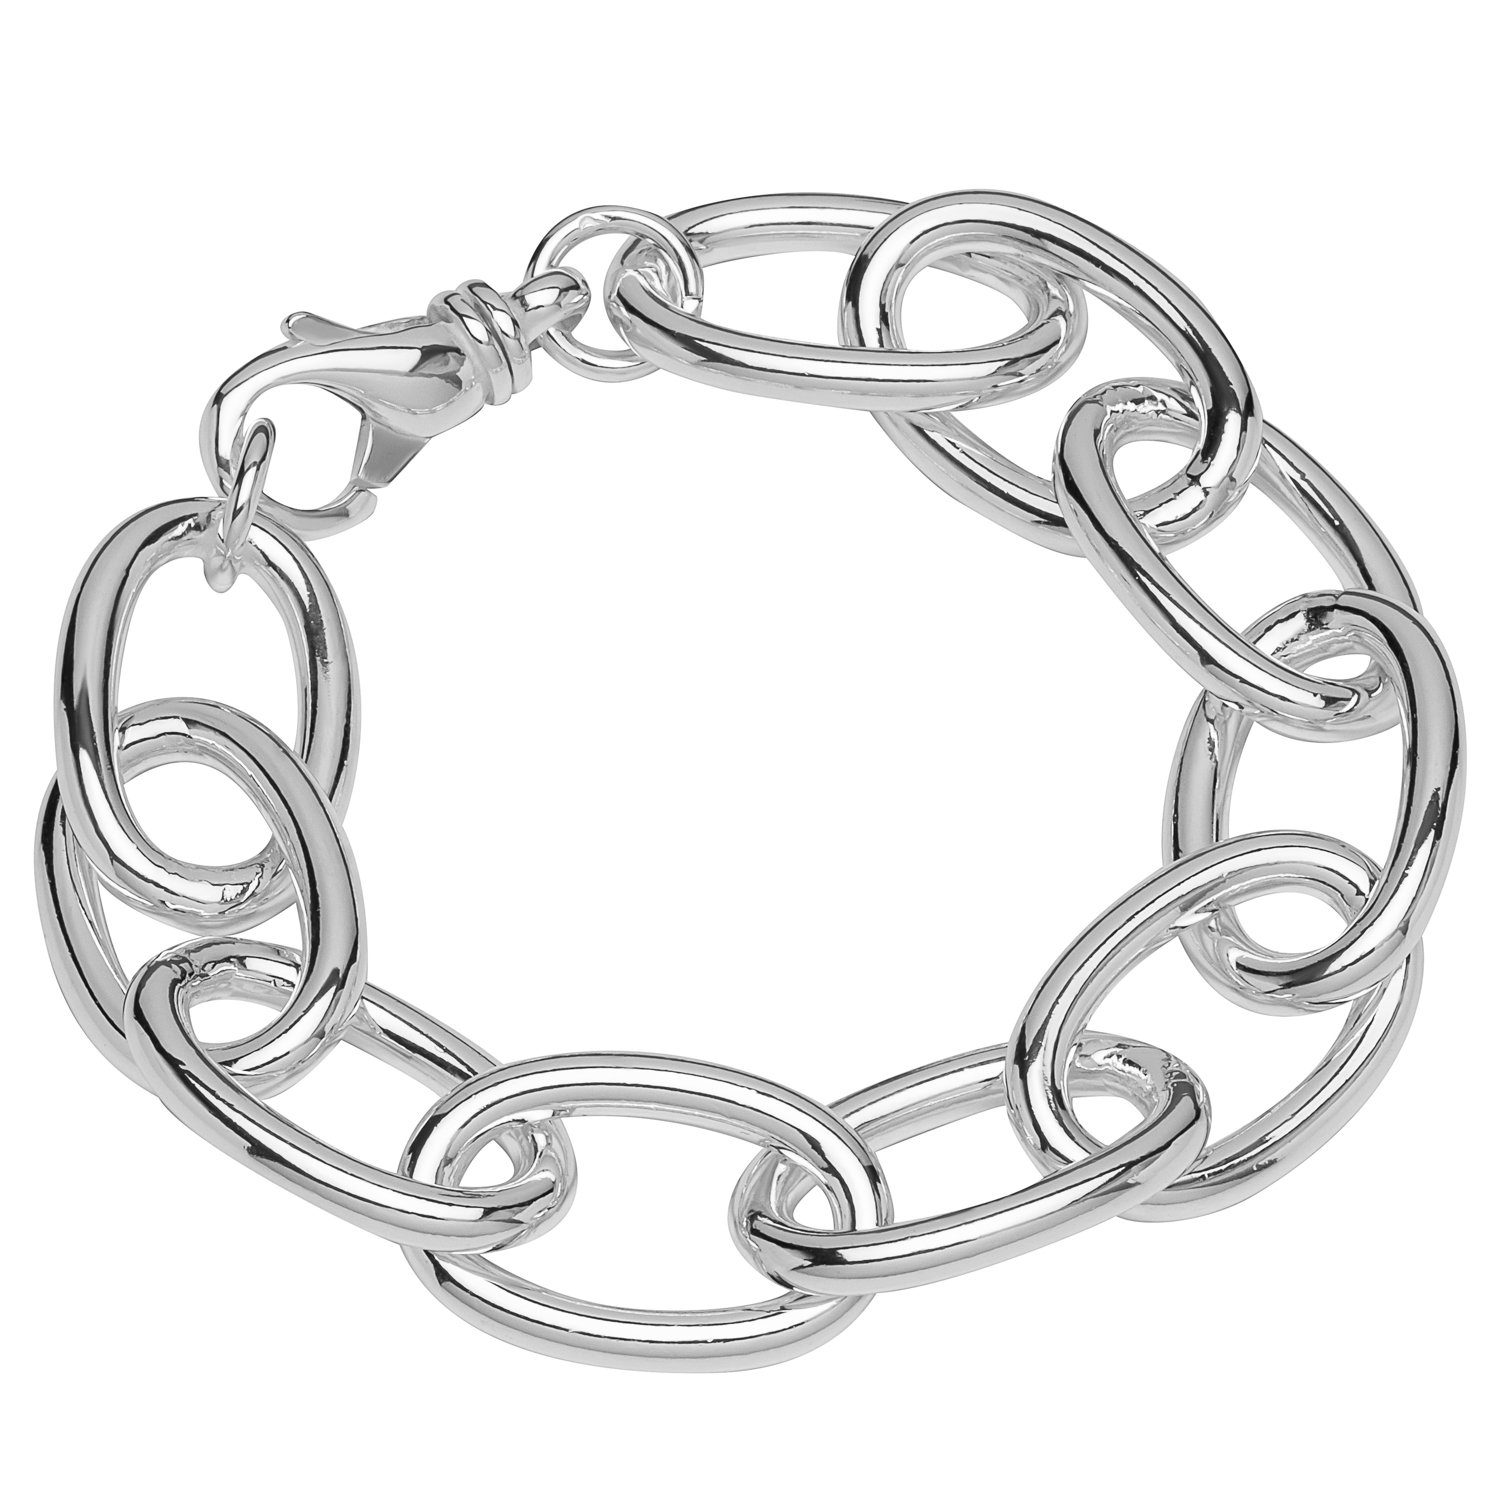 NKlaus Silberarmband Armband 925 Sterling Silber 22cm Weit Ankerkette r (1 Stück), Made in Germany